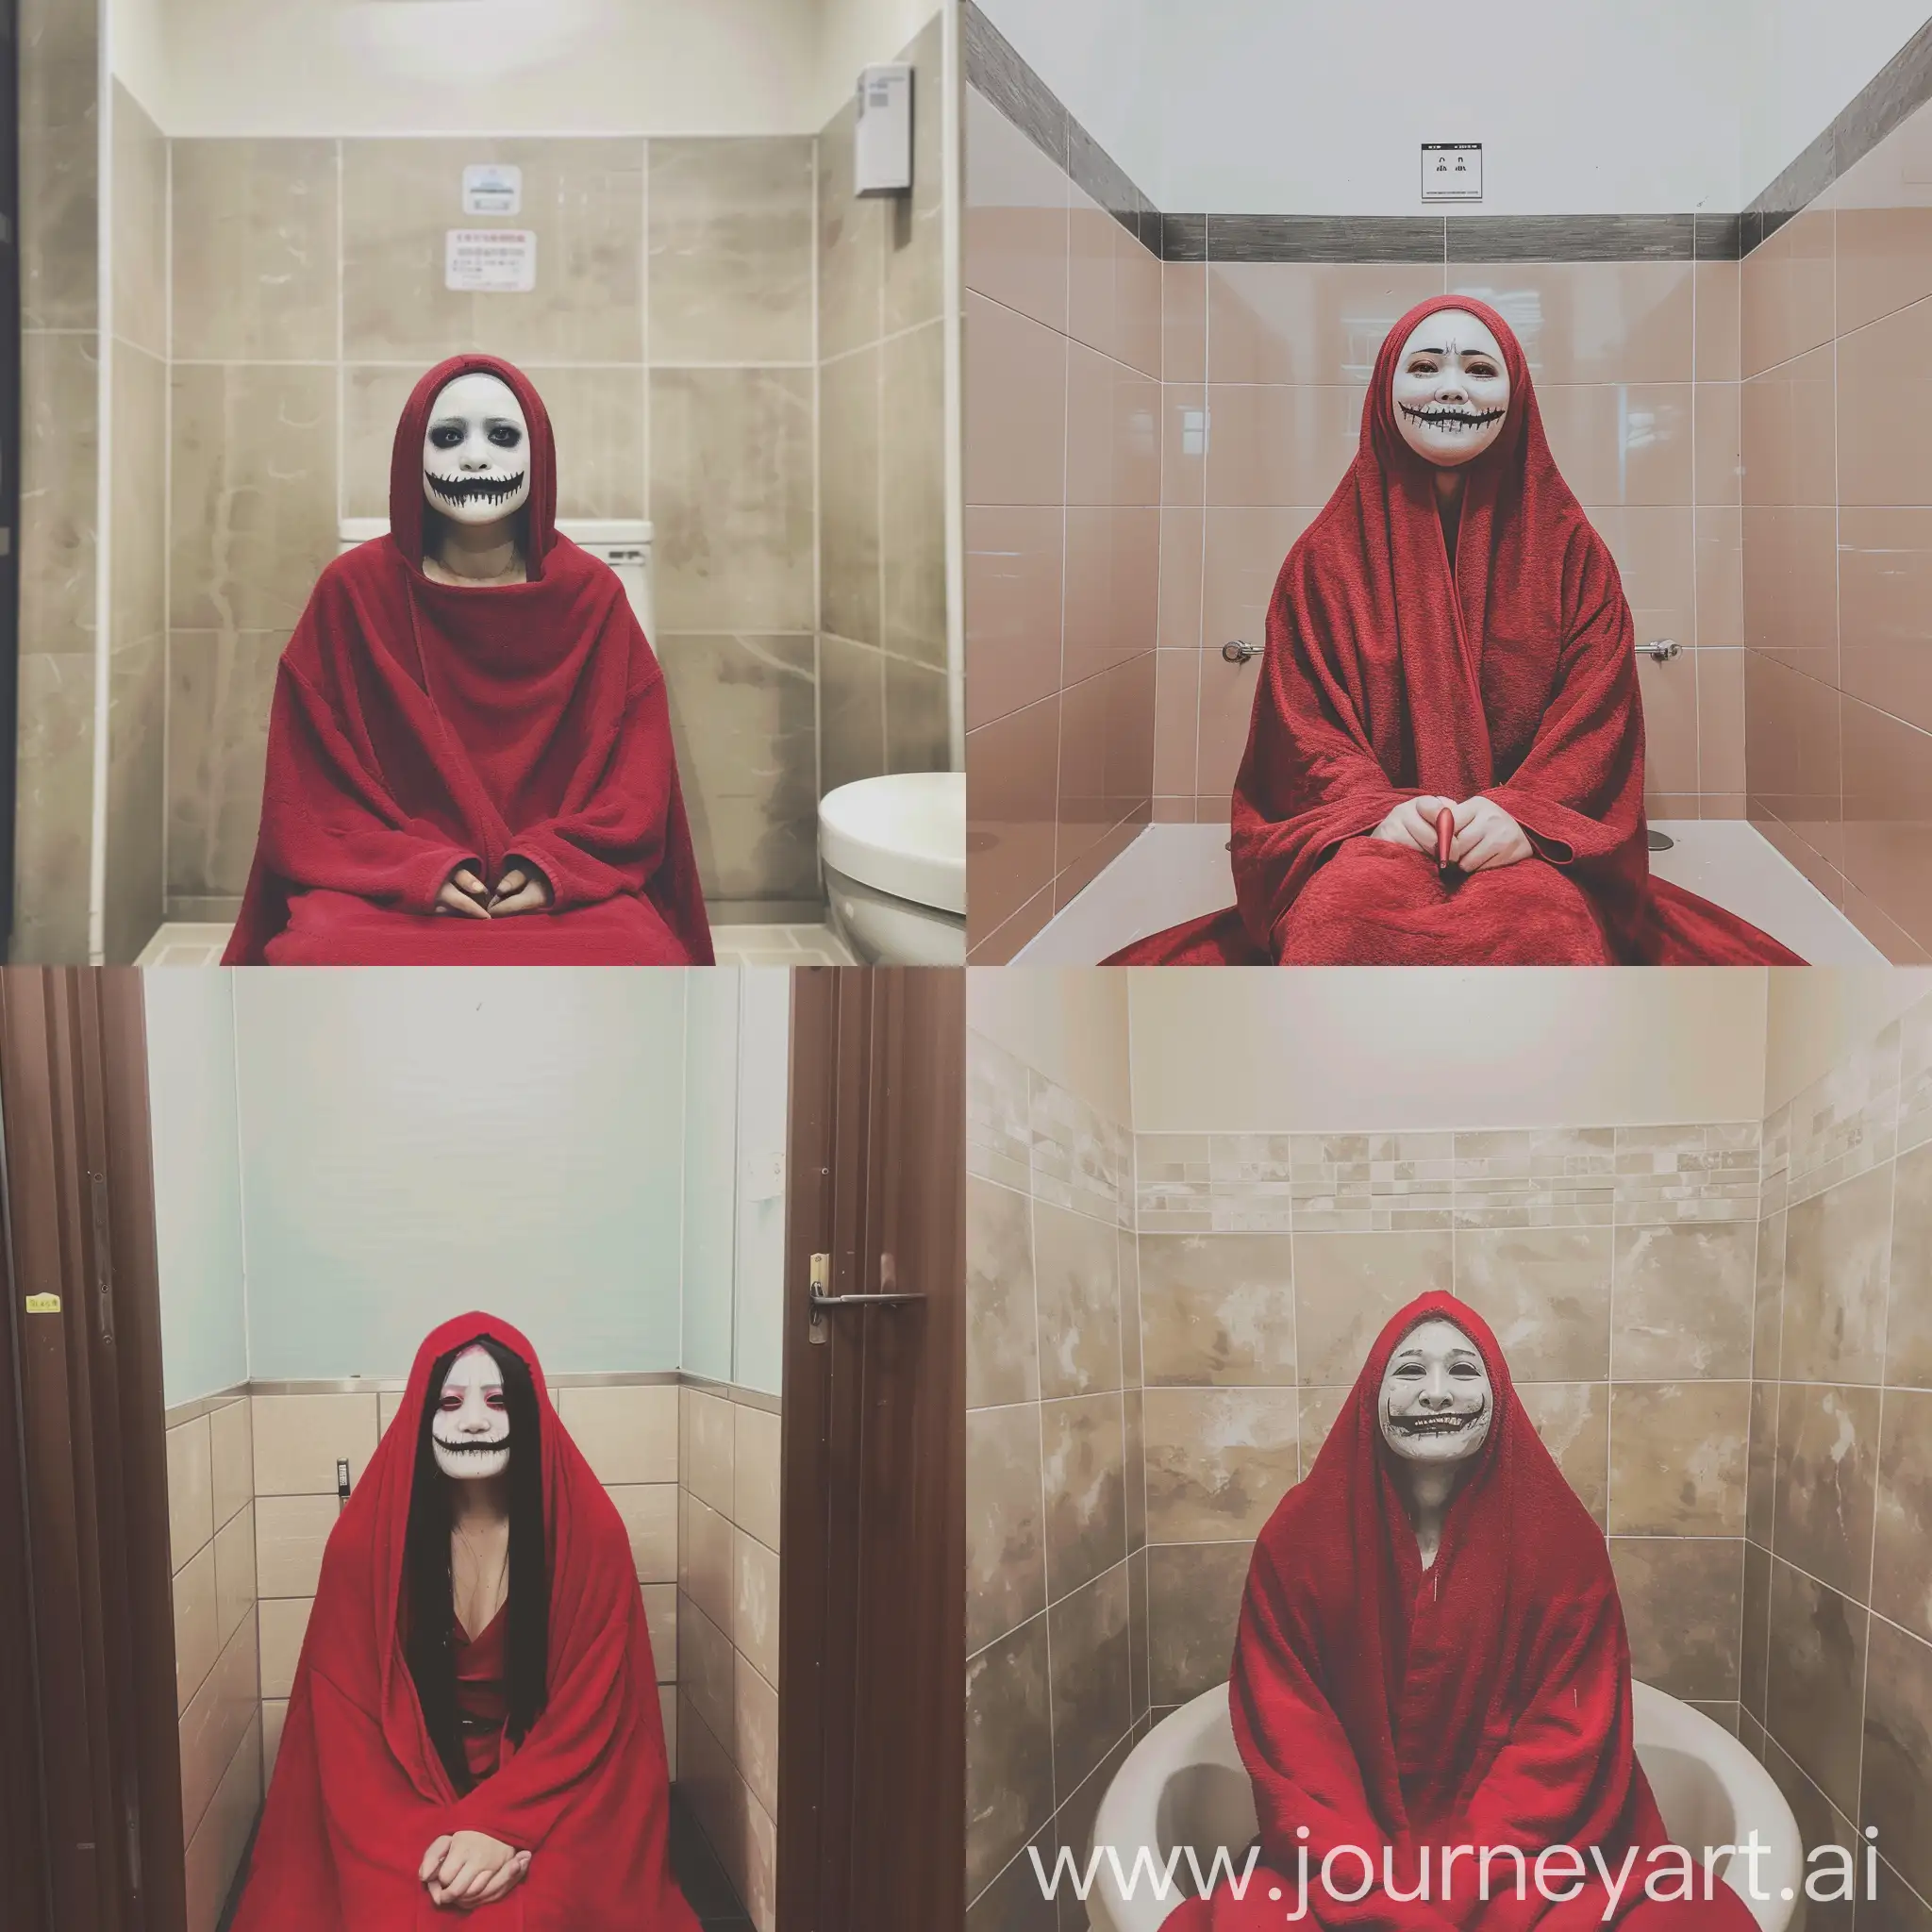 Character from Japanese folklore aka cloak, sitting inside the bathroom covered with a red cloak and her face is white and hairless with black eyes and a background with a macabre smile --sref https://encrypted-tbn0.gstatic.com/images?q=tbn:ANd9GcThVeDBuKIoy9Bgy8t4q3QGtqsahdur38Wz2Q